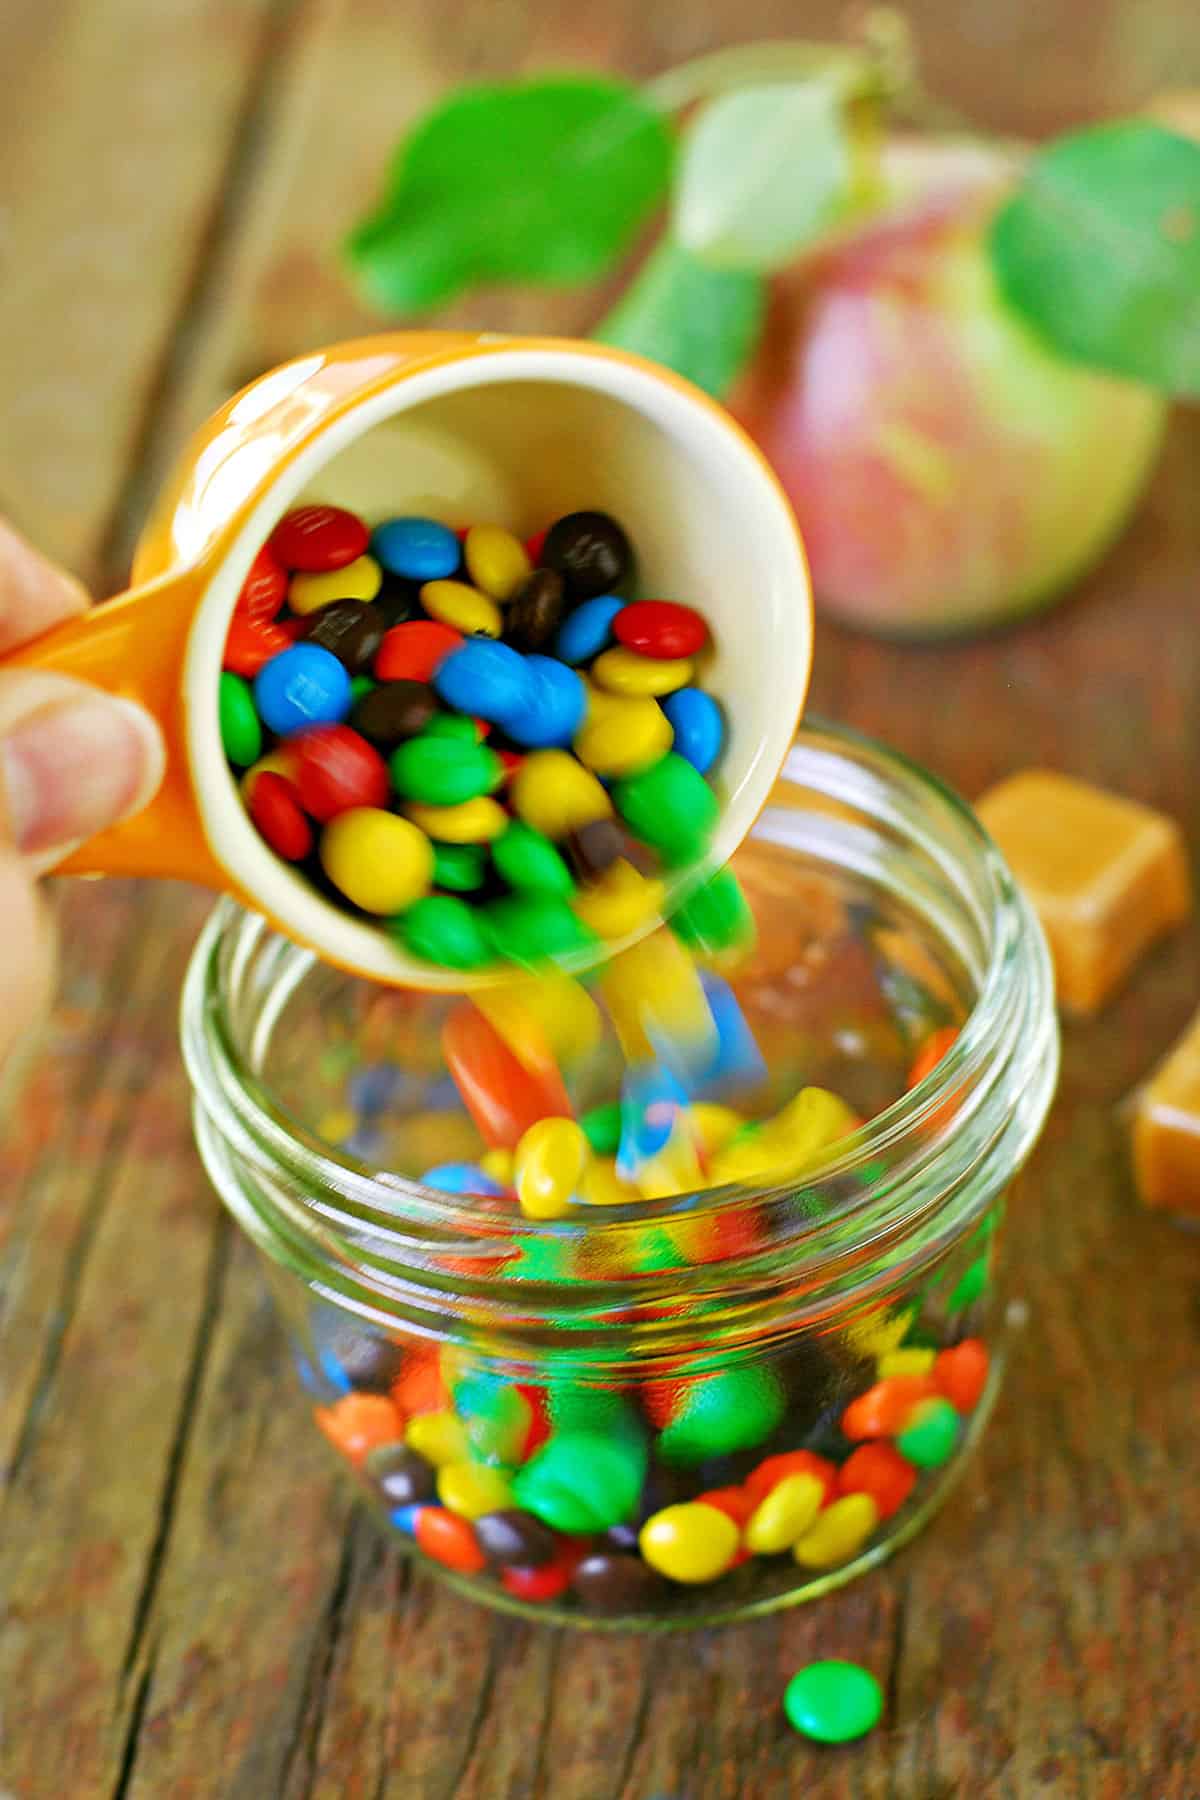 A hand is pouring candy from a measuring cup into a glass jar.